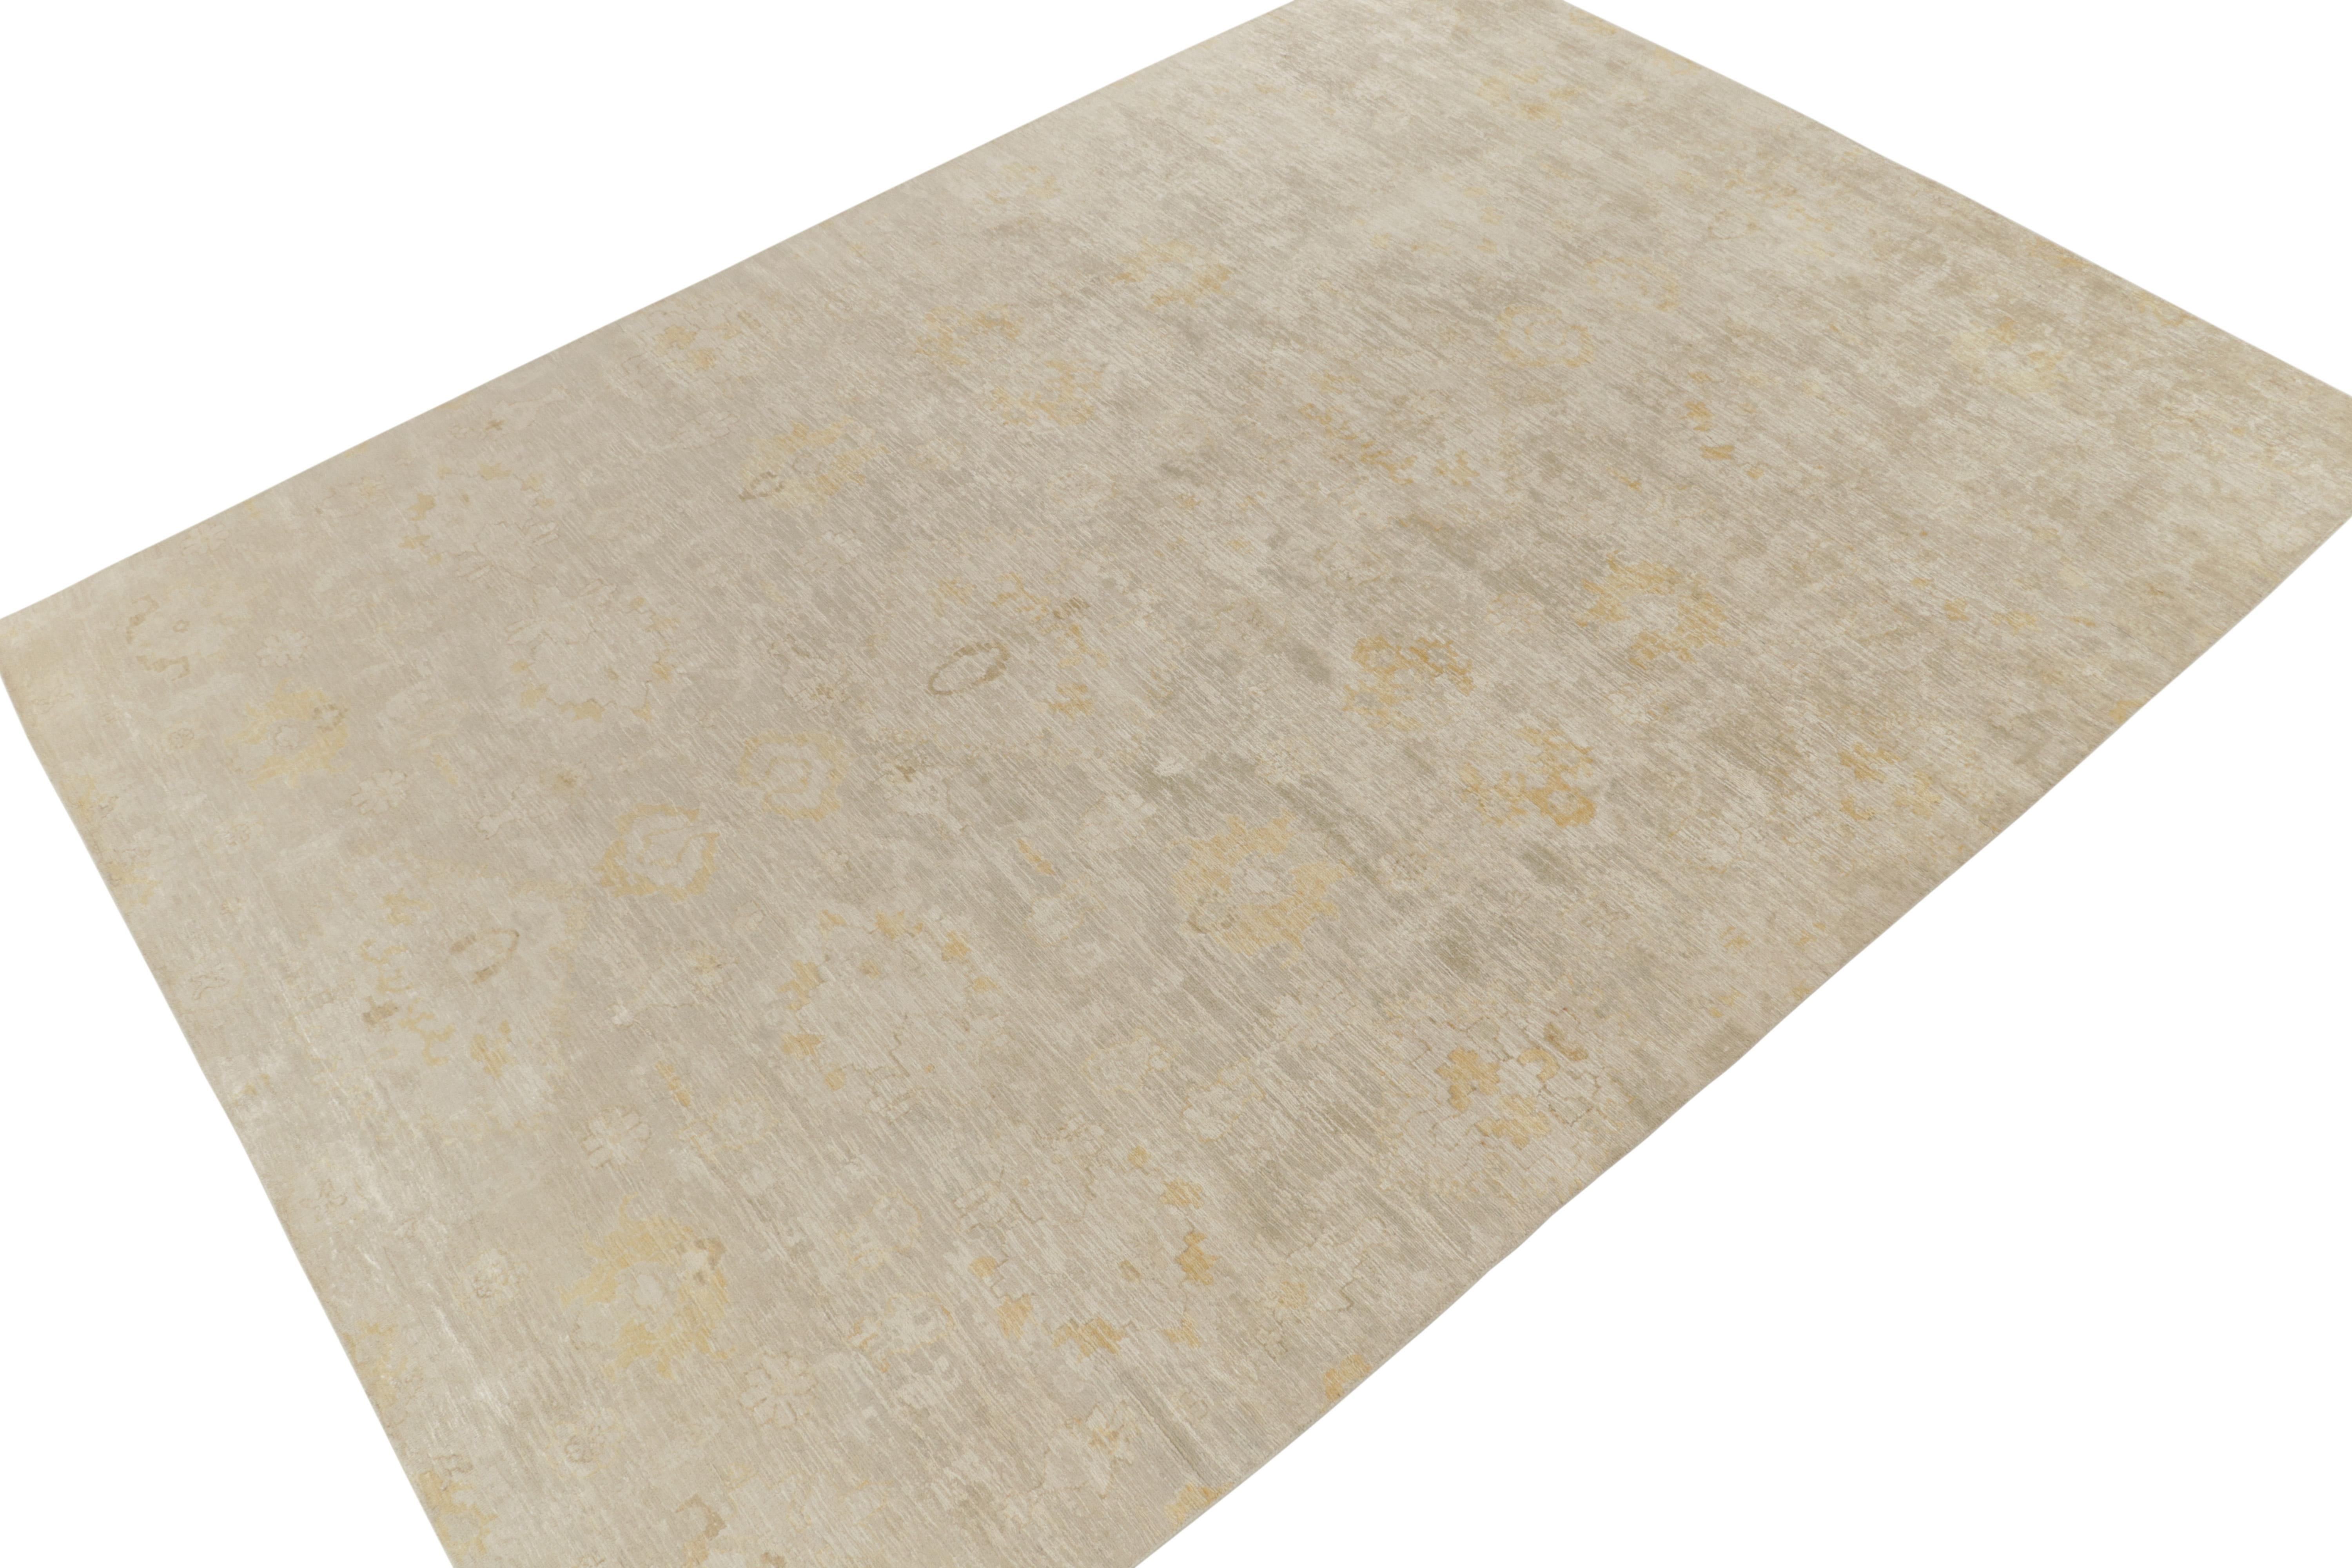 Hand knotted in fine silk, a 10x14 abstract piece from Rug & Kilim’s contemporary selections uniquely inspired by Classic floral pattersn. The alluring drawing presents itself with ivory and golden-yellow tones together to bring out a textural,